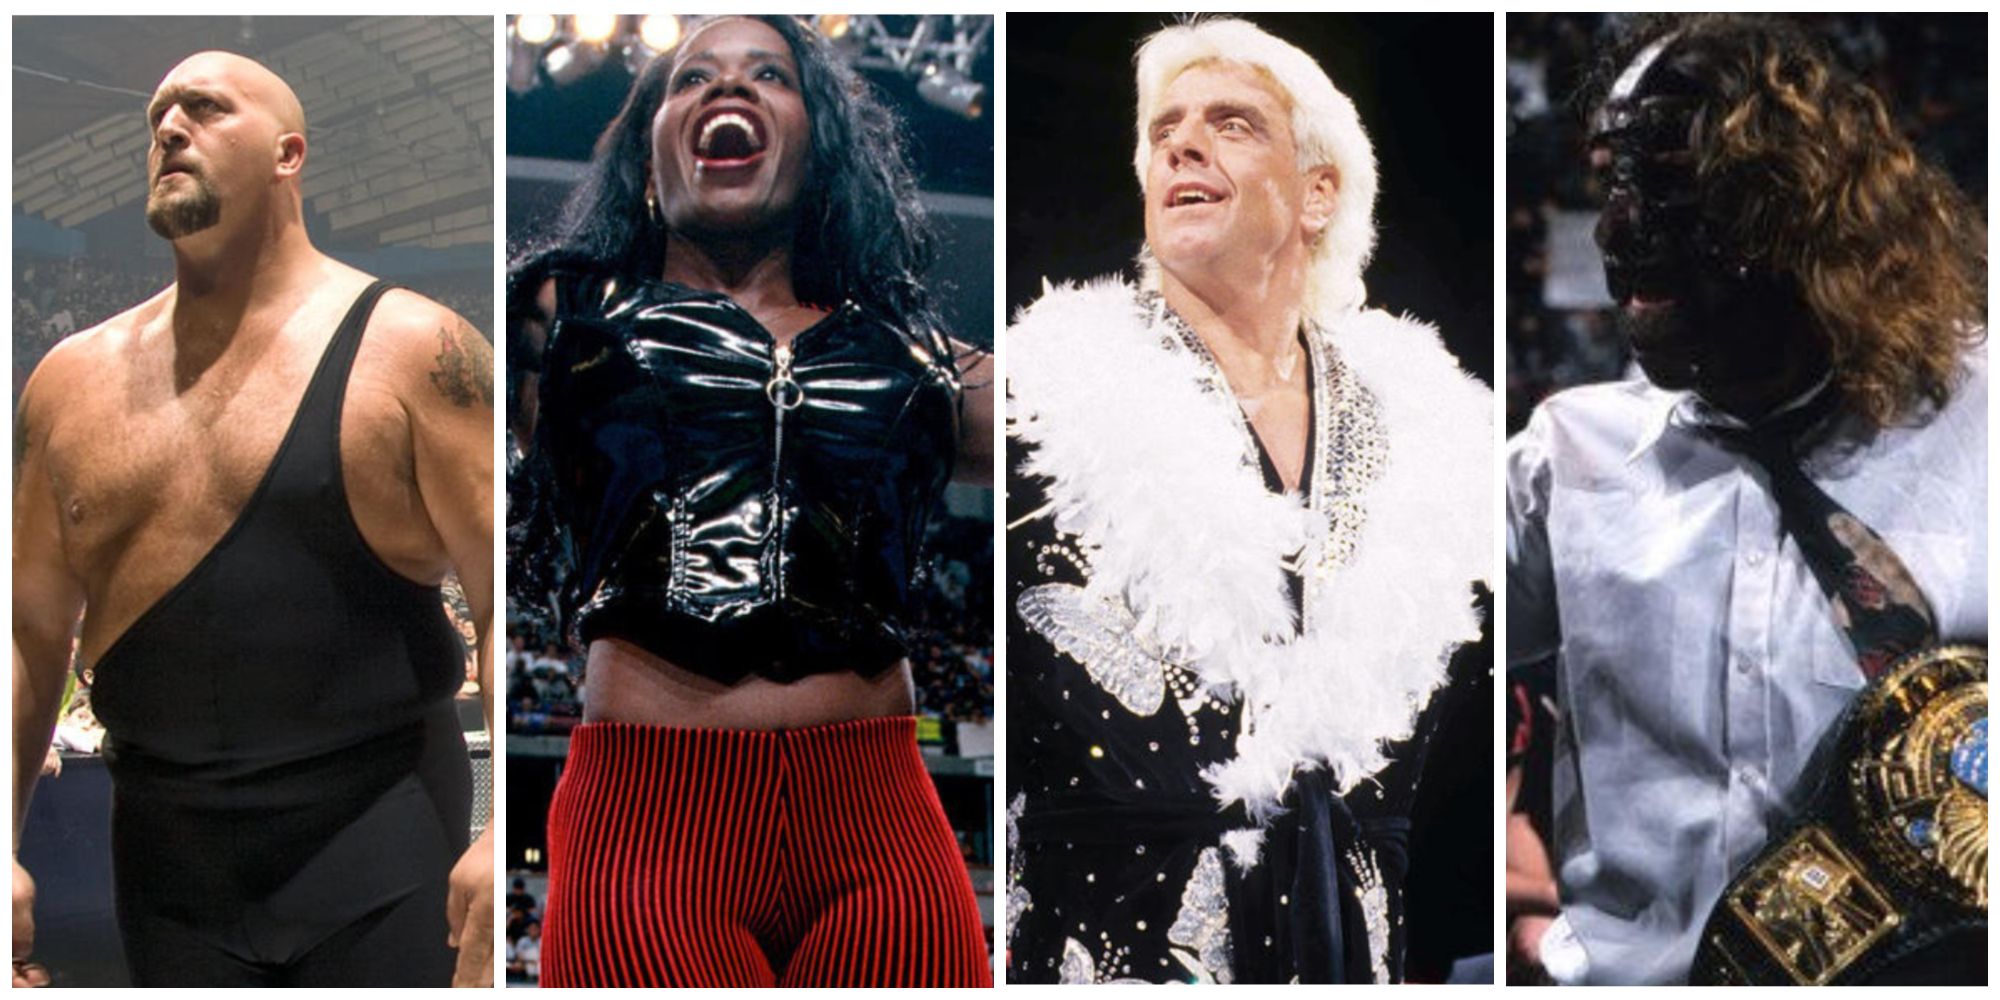 WWE superstars Big Show, Jacqueline, Ric Flair, and Mankind side by side